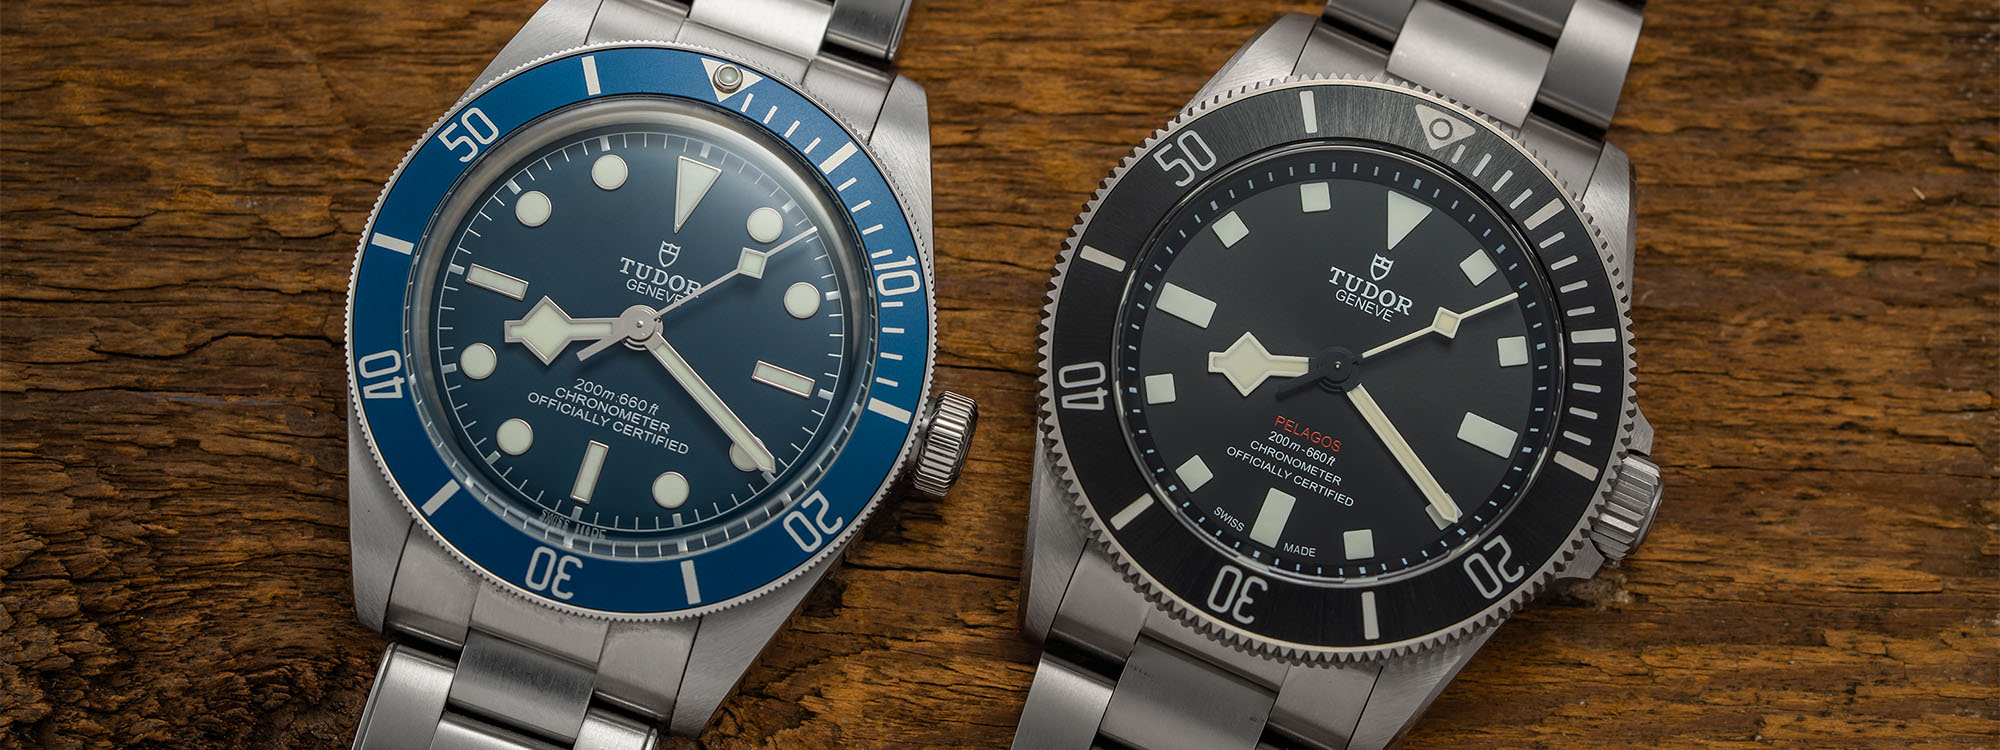 Tudor Pelagos 39, LHD, FXD, Alinghi Editions: Everything You Need to Know